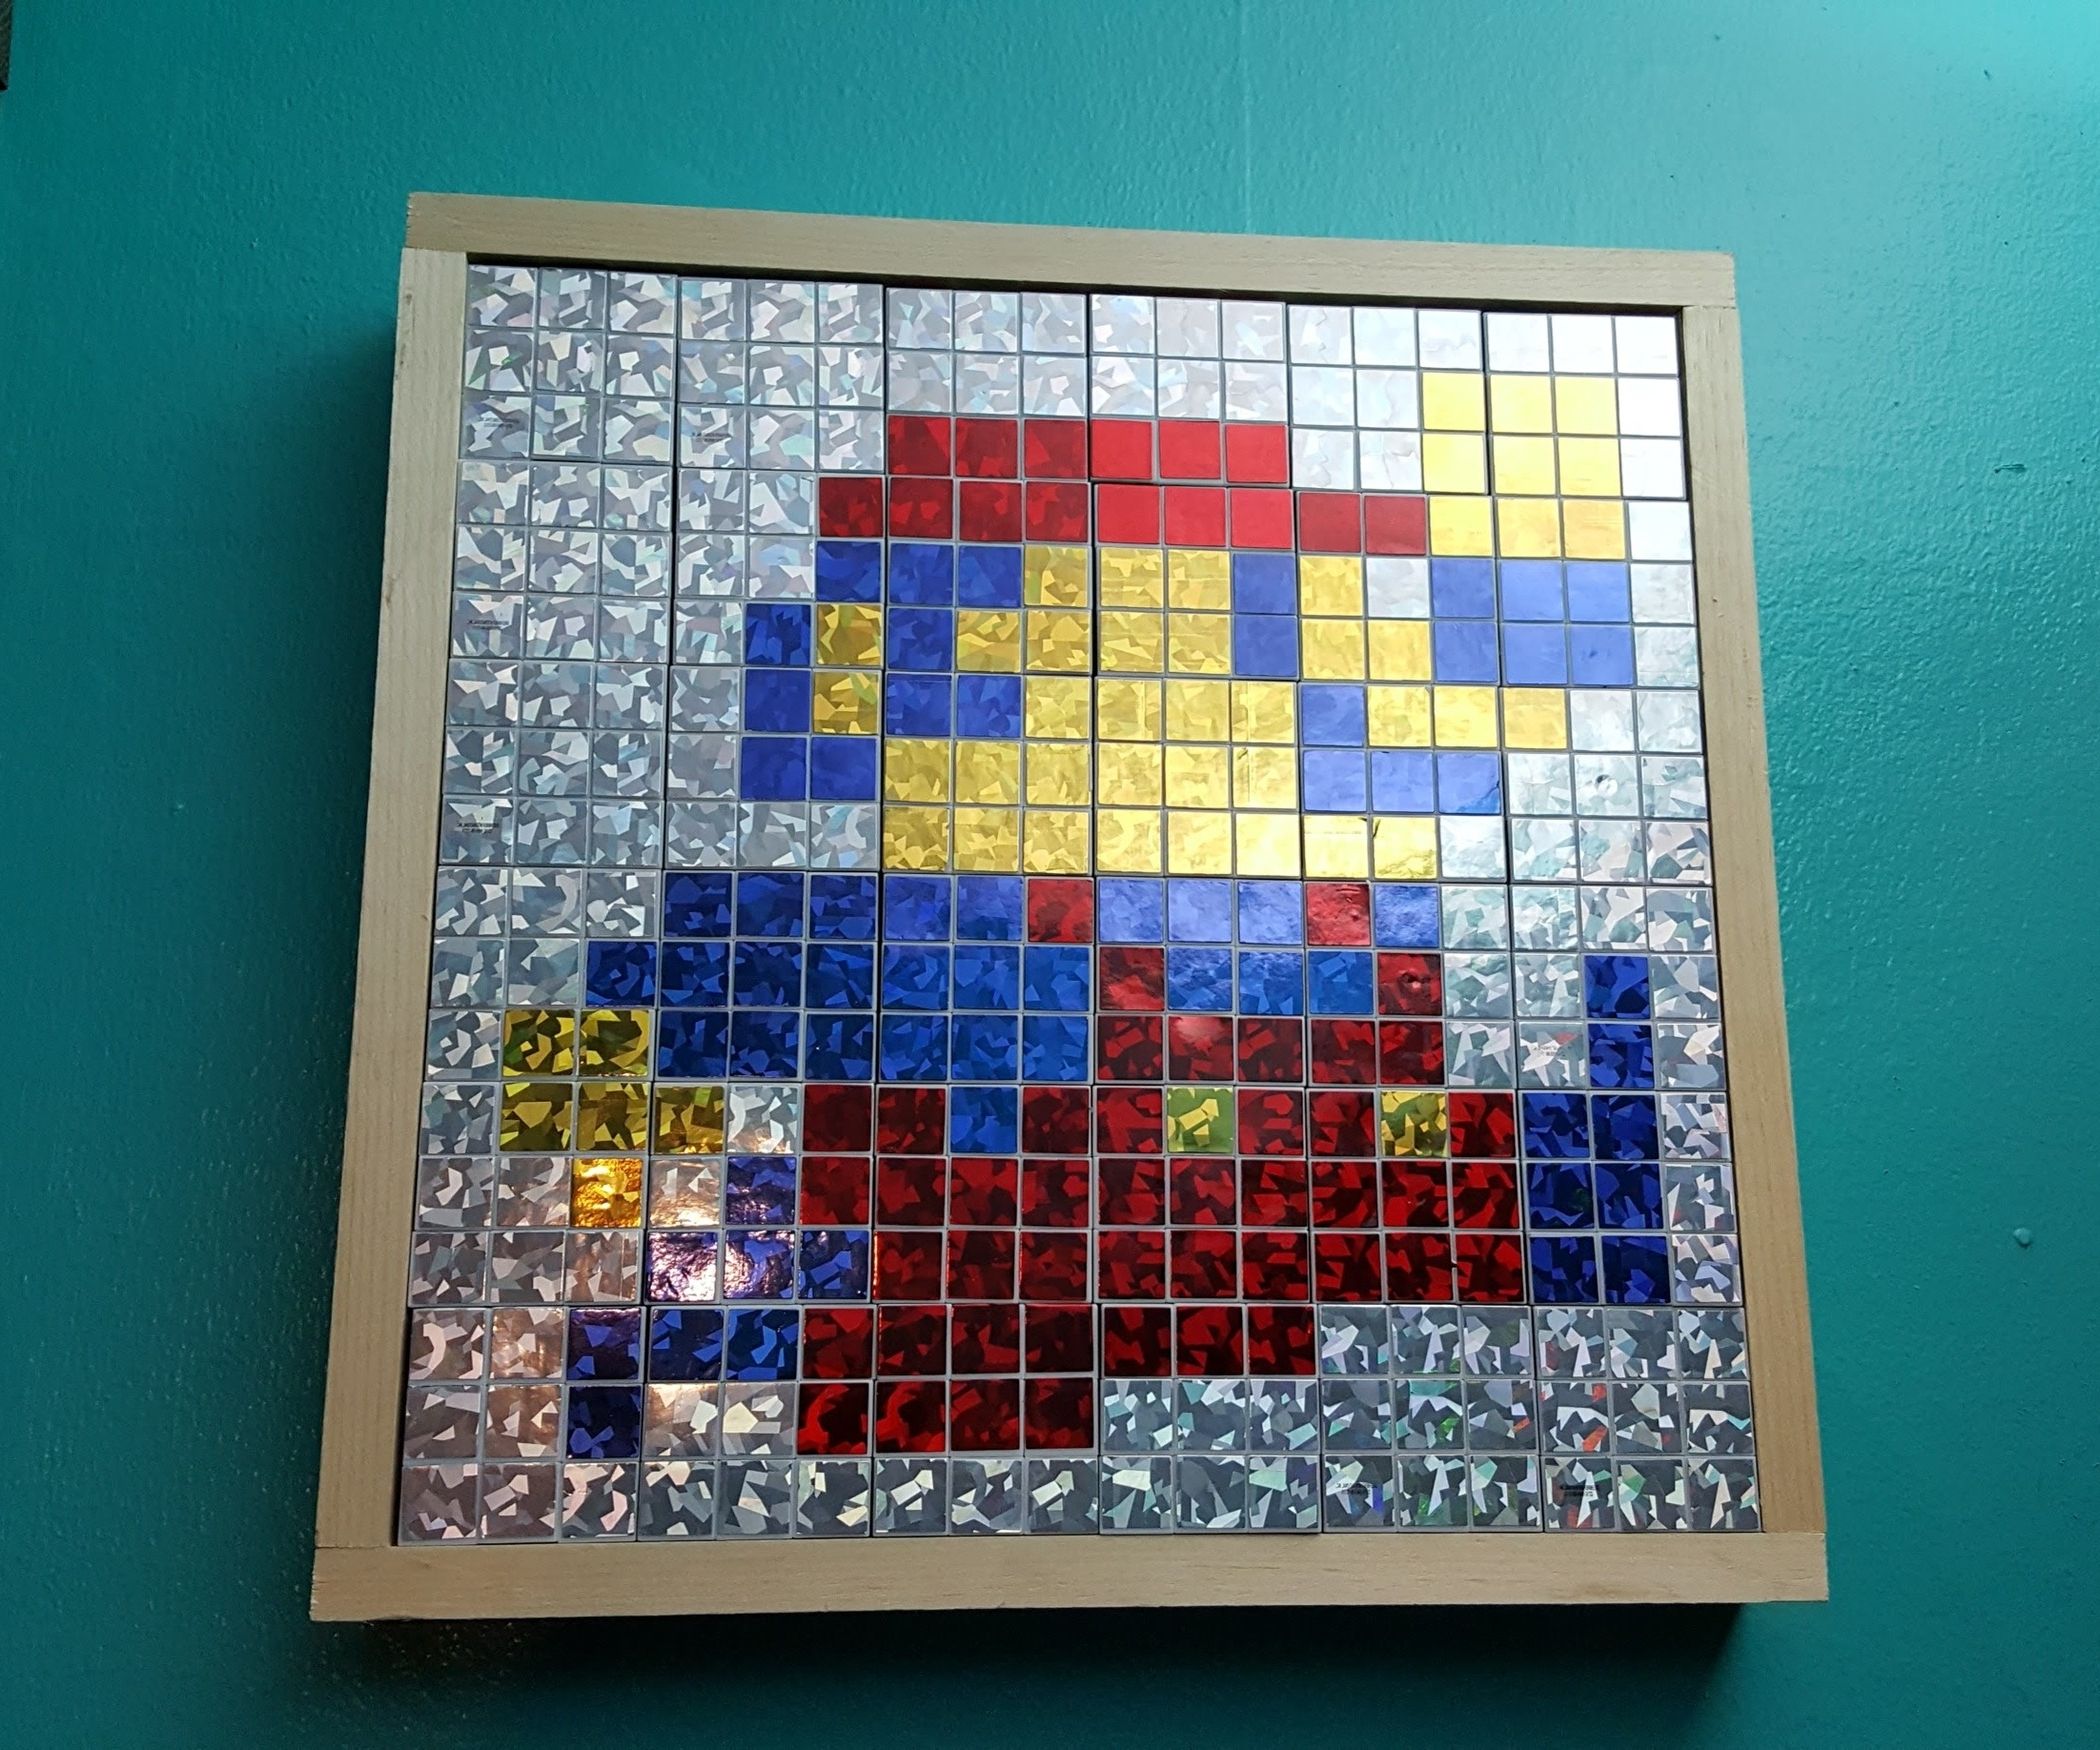 Pixel Mosaic Wall Art Within Current Rubik's Cube Pixel Art Wall Box: 6 Steps (with Pictures) (View 11 of 15)